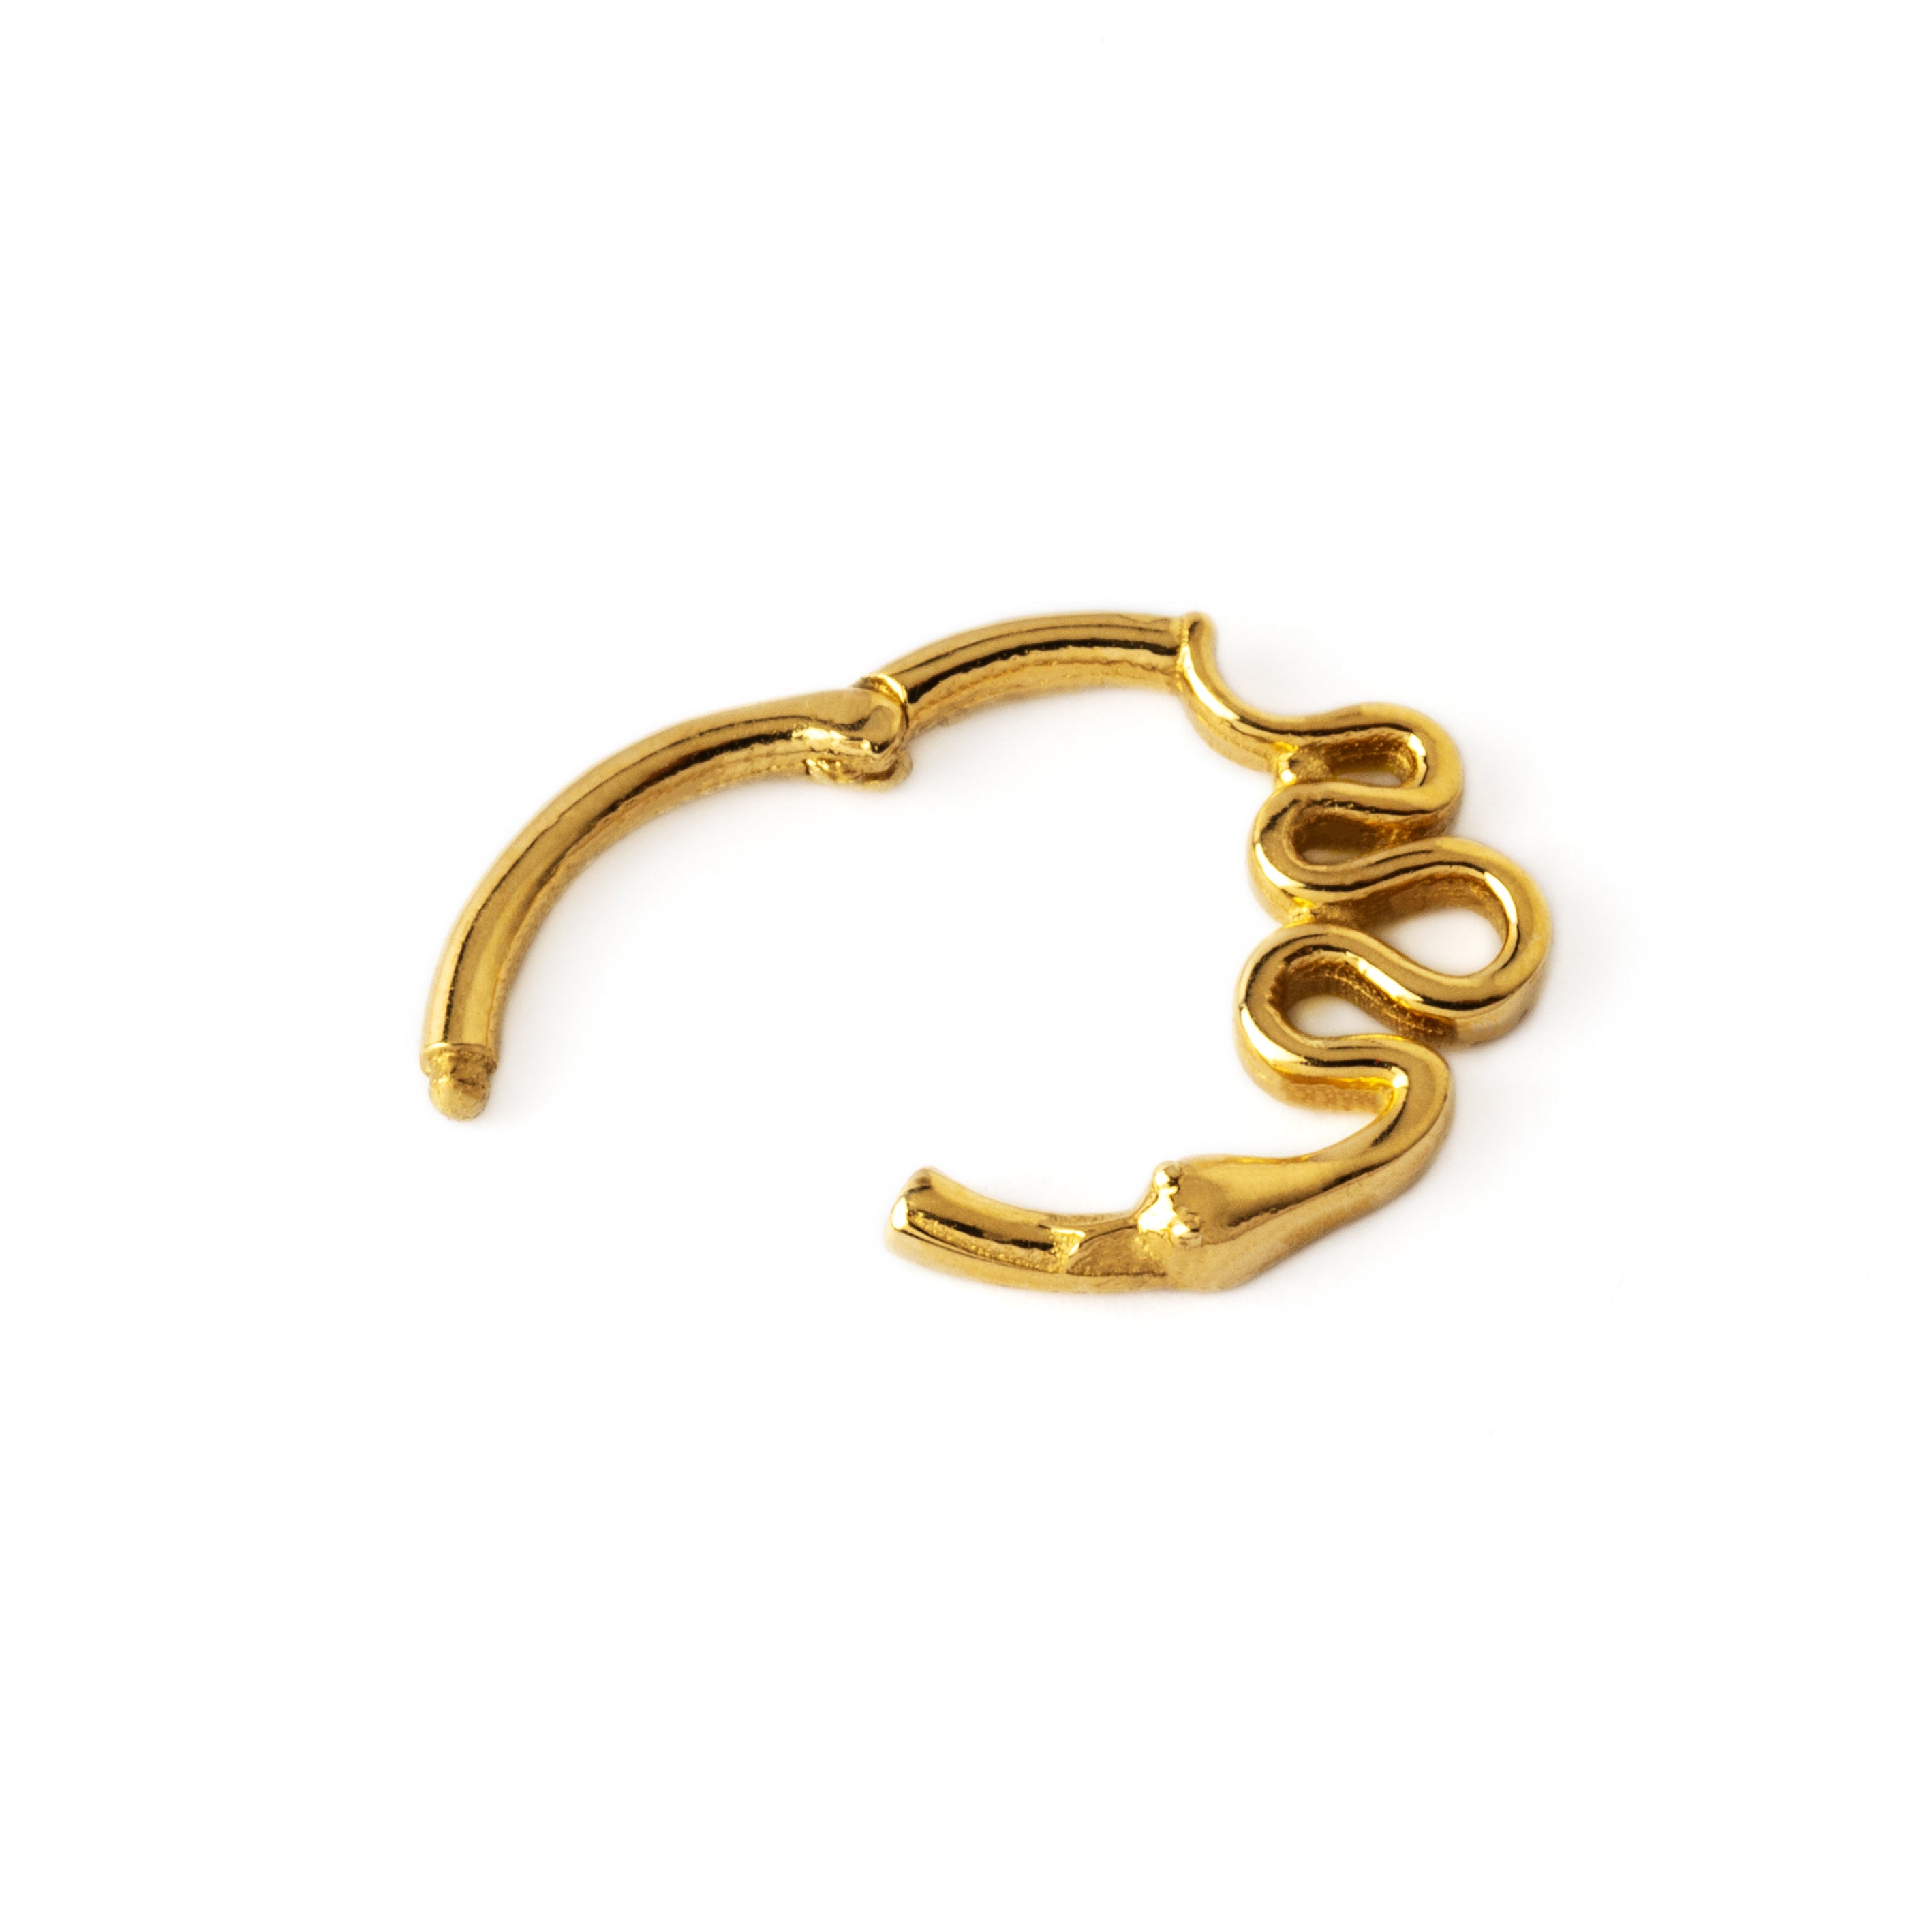 14k Gold Snake septum clicker ring click on closure view